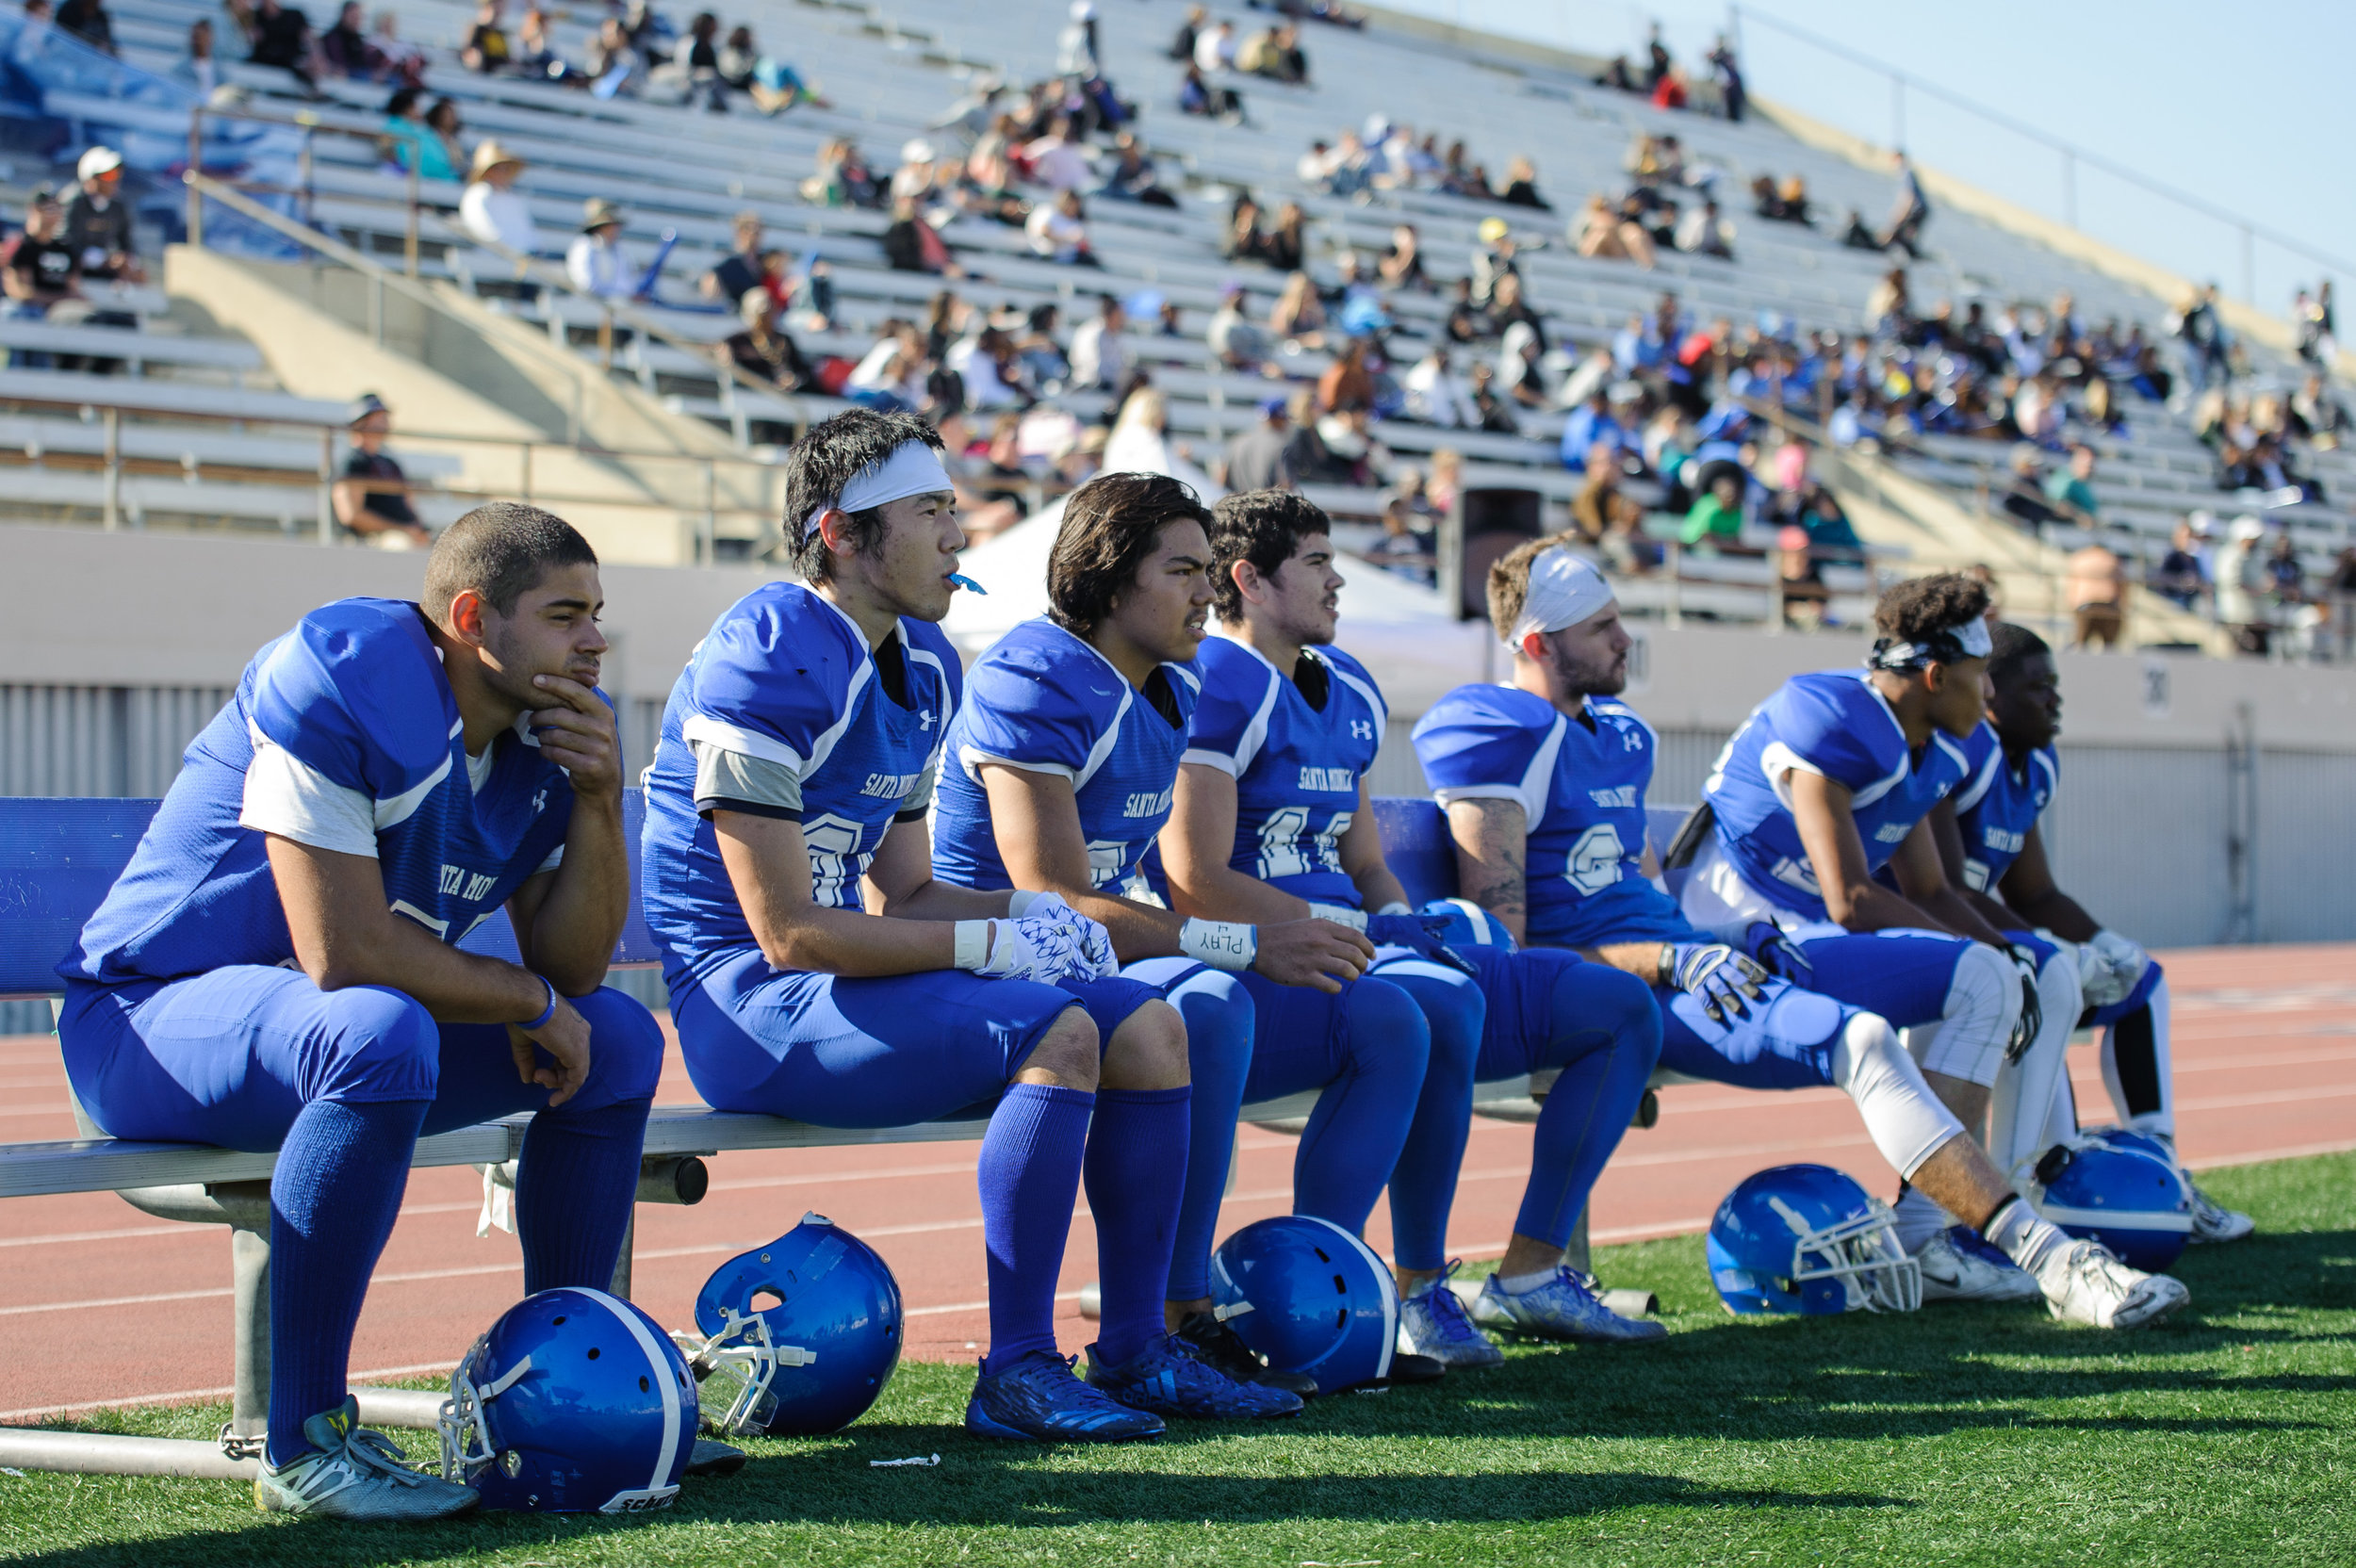  Several Corsairs watch from the sidelines as their teammates attempt to start a rally to recover from the large deficit. The Santa Monica College Corsairs lose their final home game 7-48 to the College of the Canyons Cougars and will play their fina